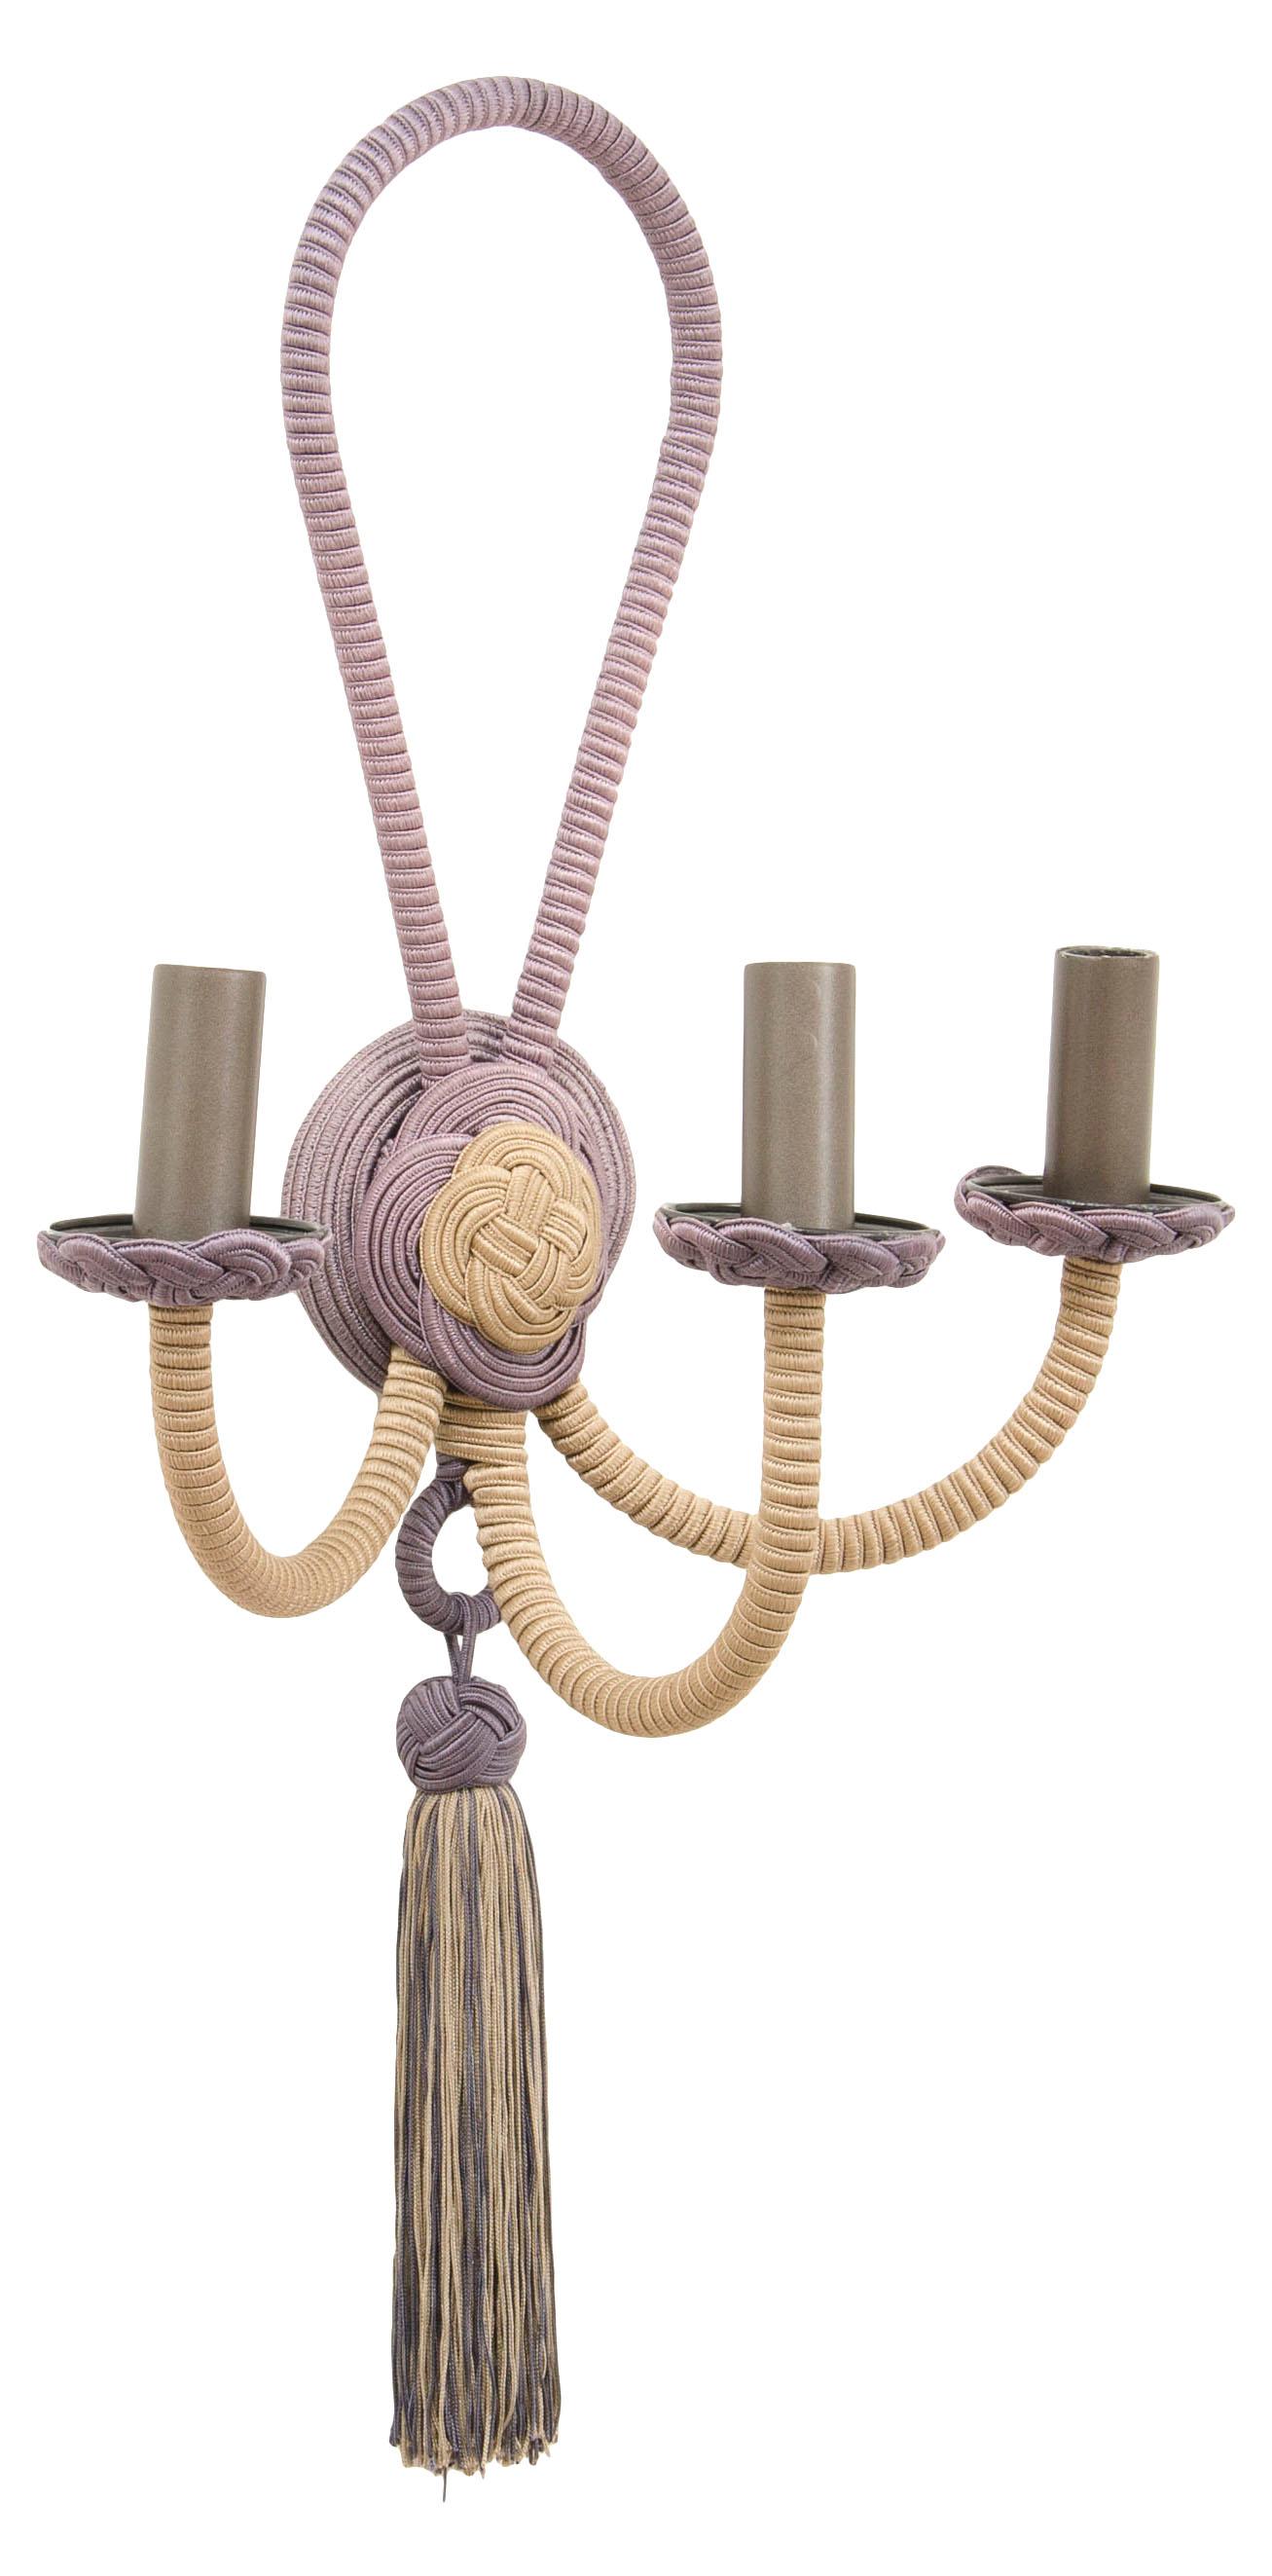 Three arm wrought iron structure is wrapped with silk cording with arms emanating from a central knot. Cording under the bobéches is shaped in traditional passementarie knotted detail. Custom sizes available.